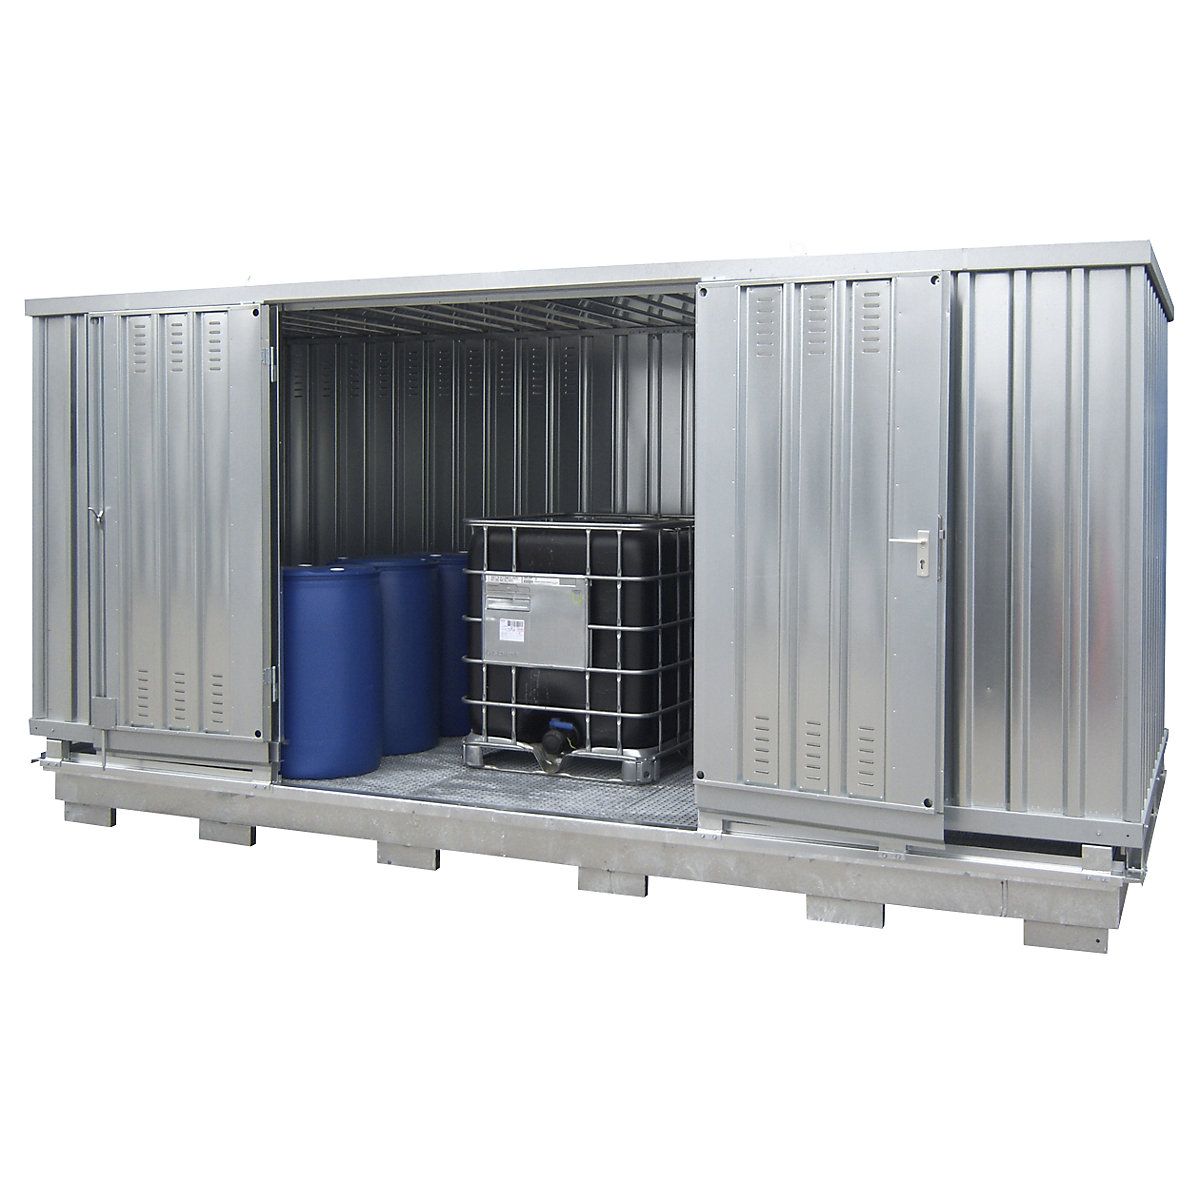 Hazardous goods container for the passive storage of flammable media – LaCont